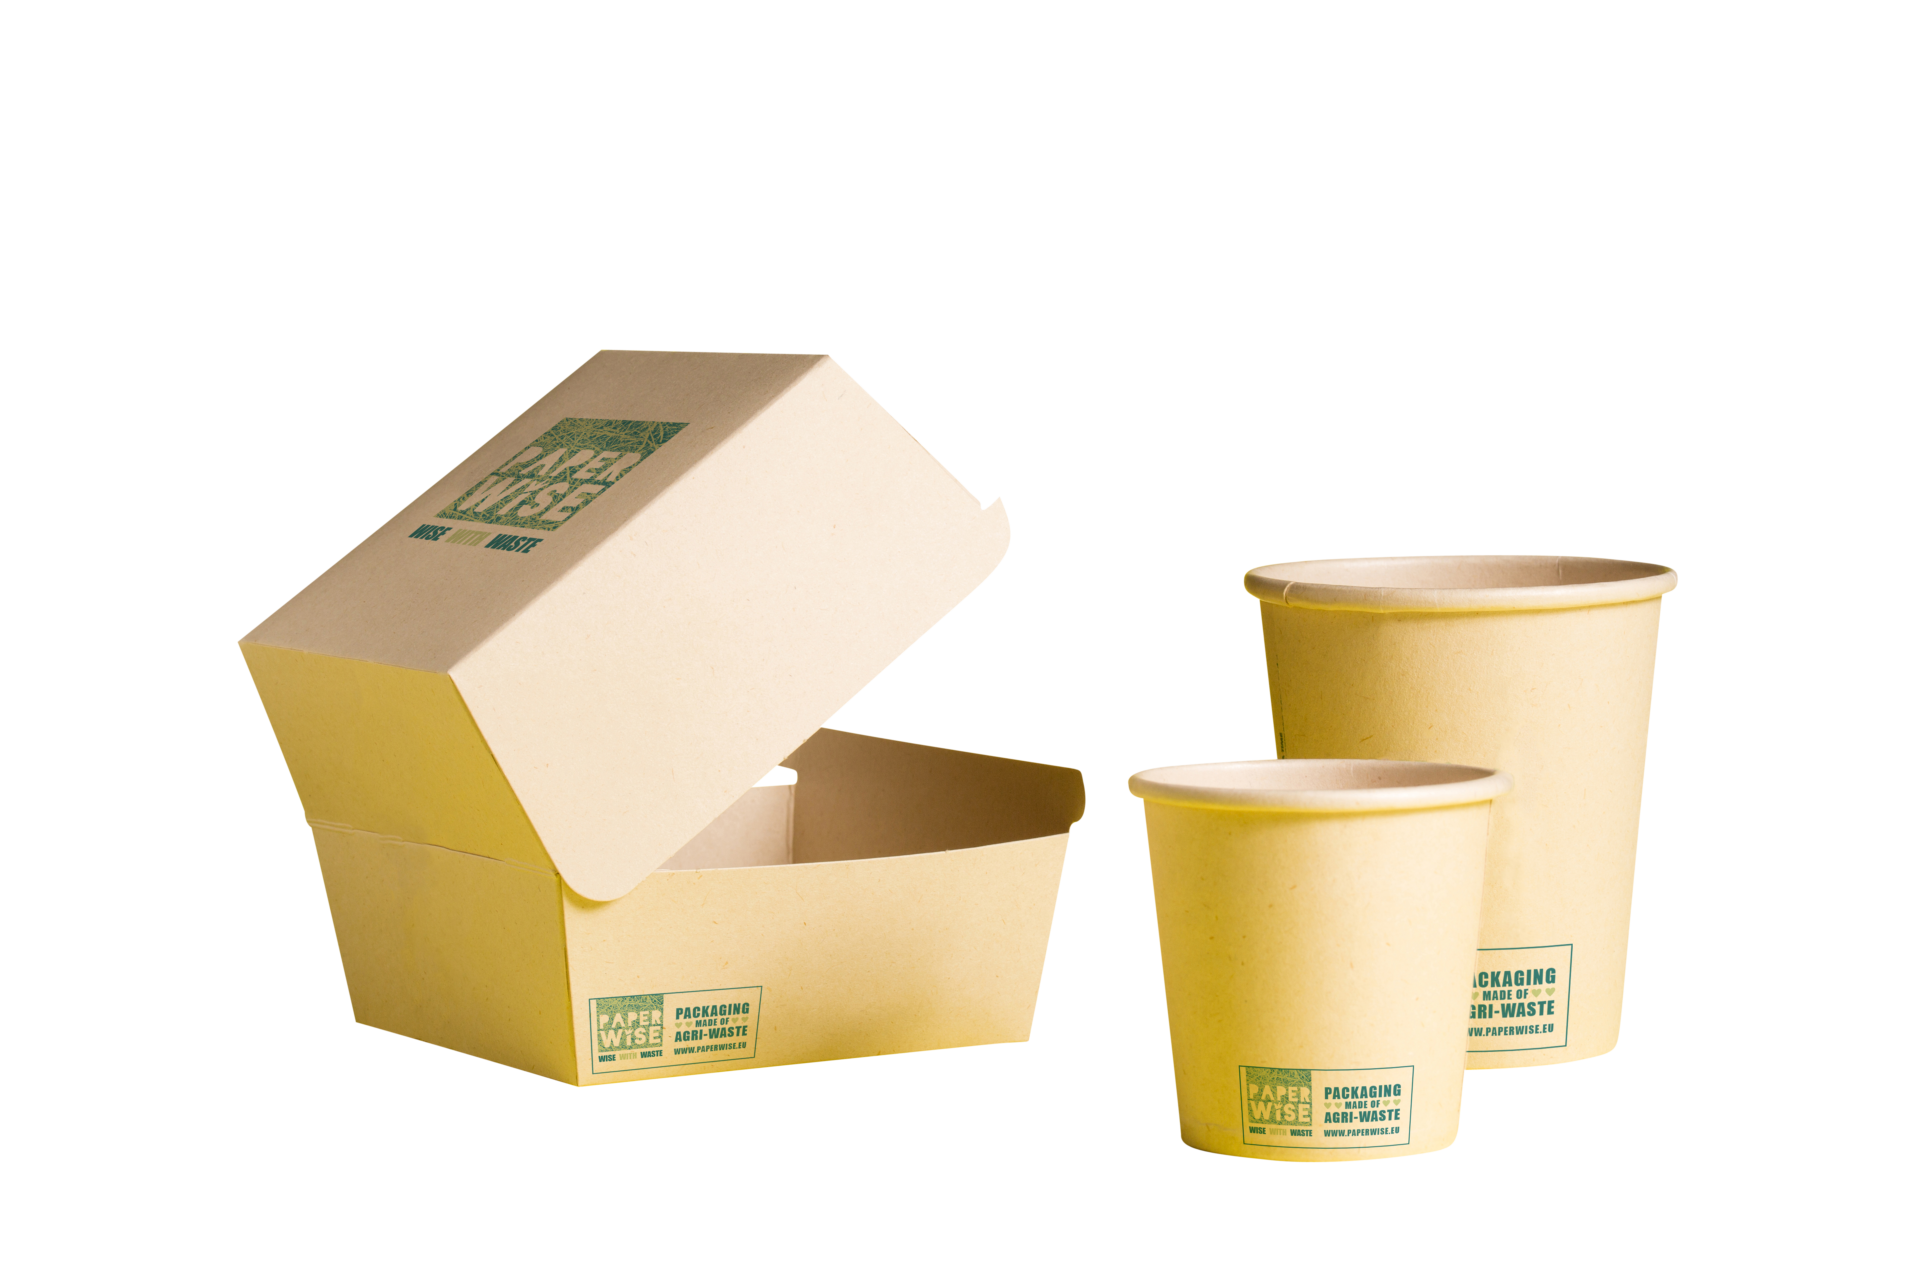 wp content uploads  0    0  compostable disposable snack packaging togo eco paper board foodsafe plasticfree snacks fries wraps hamburger pizza 6c